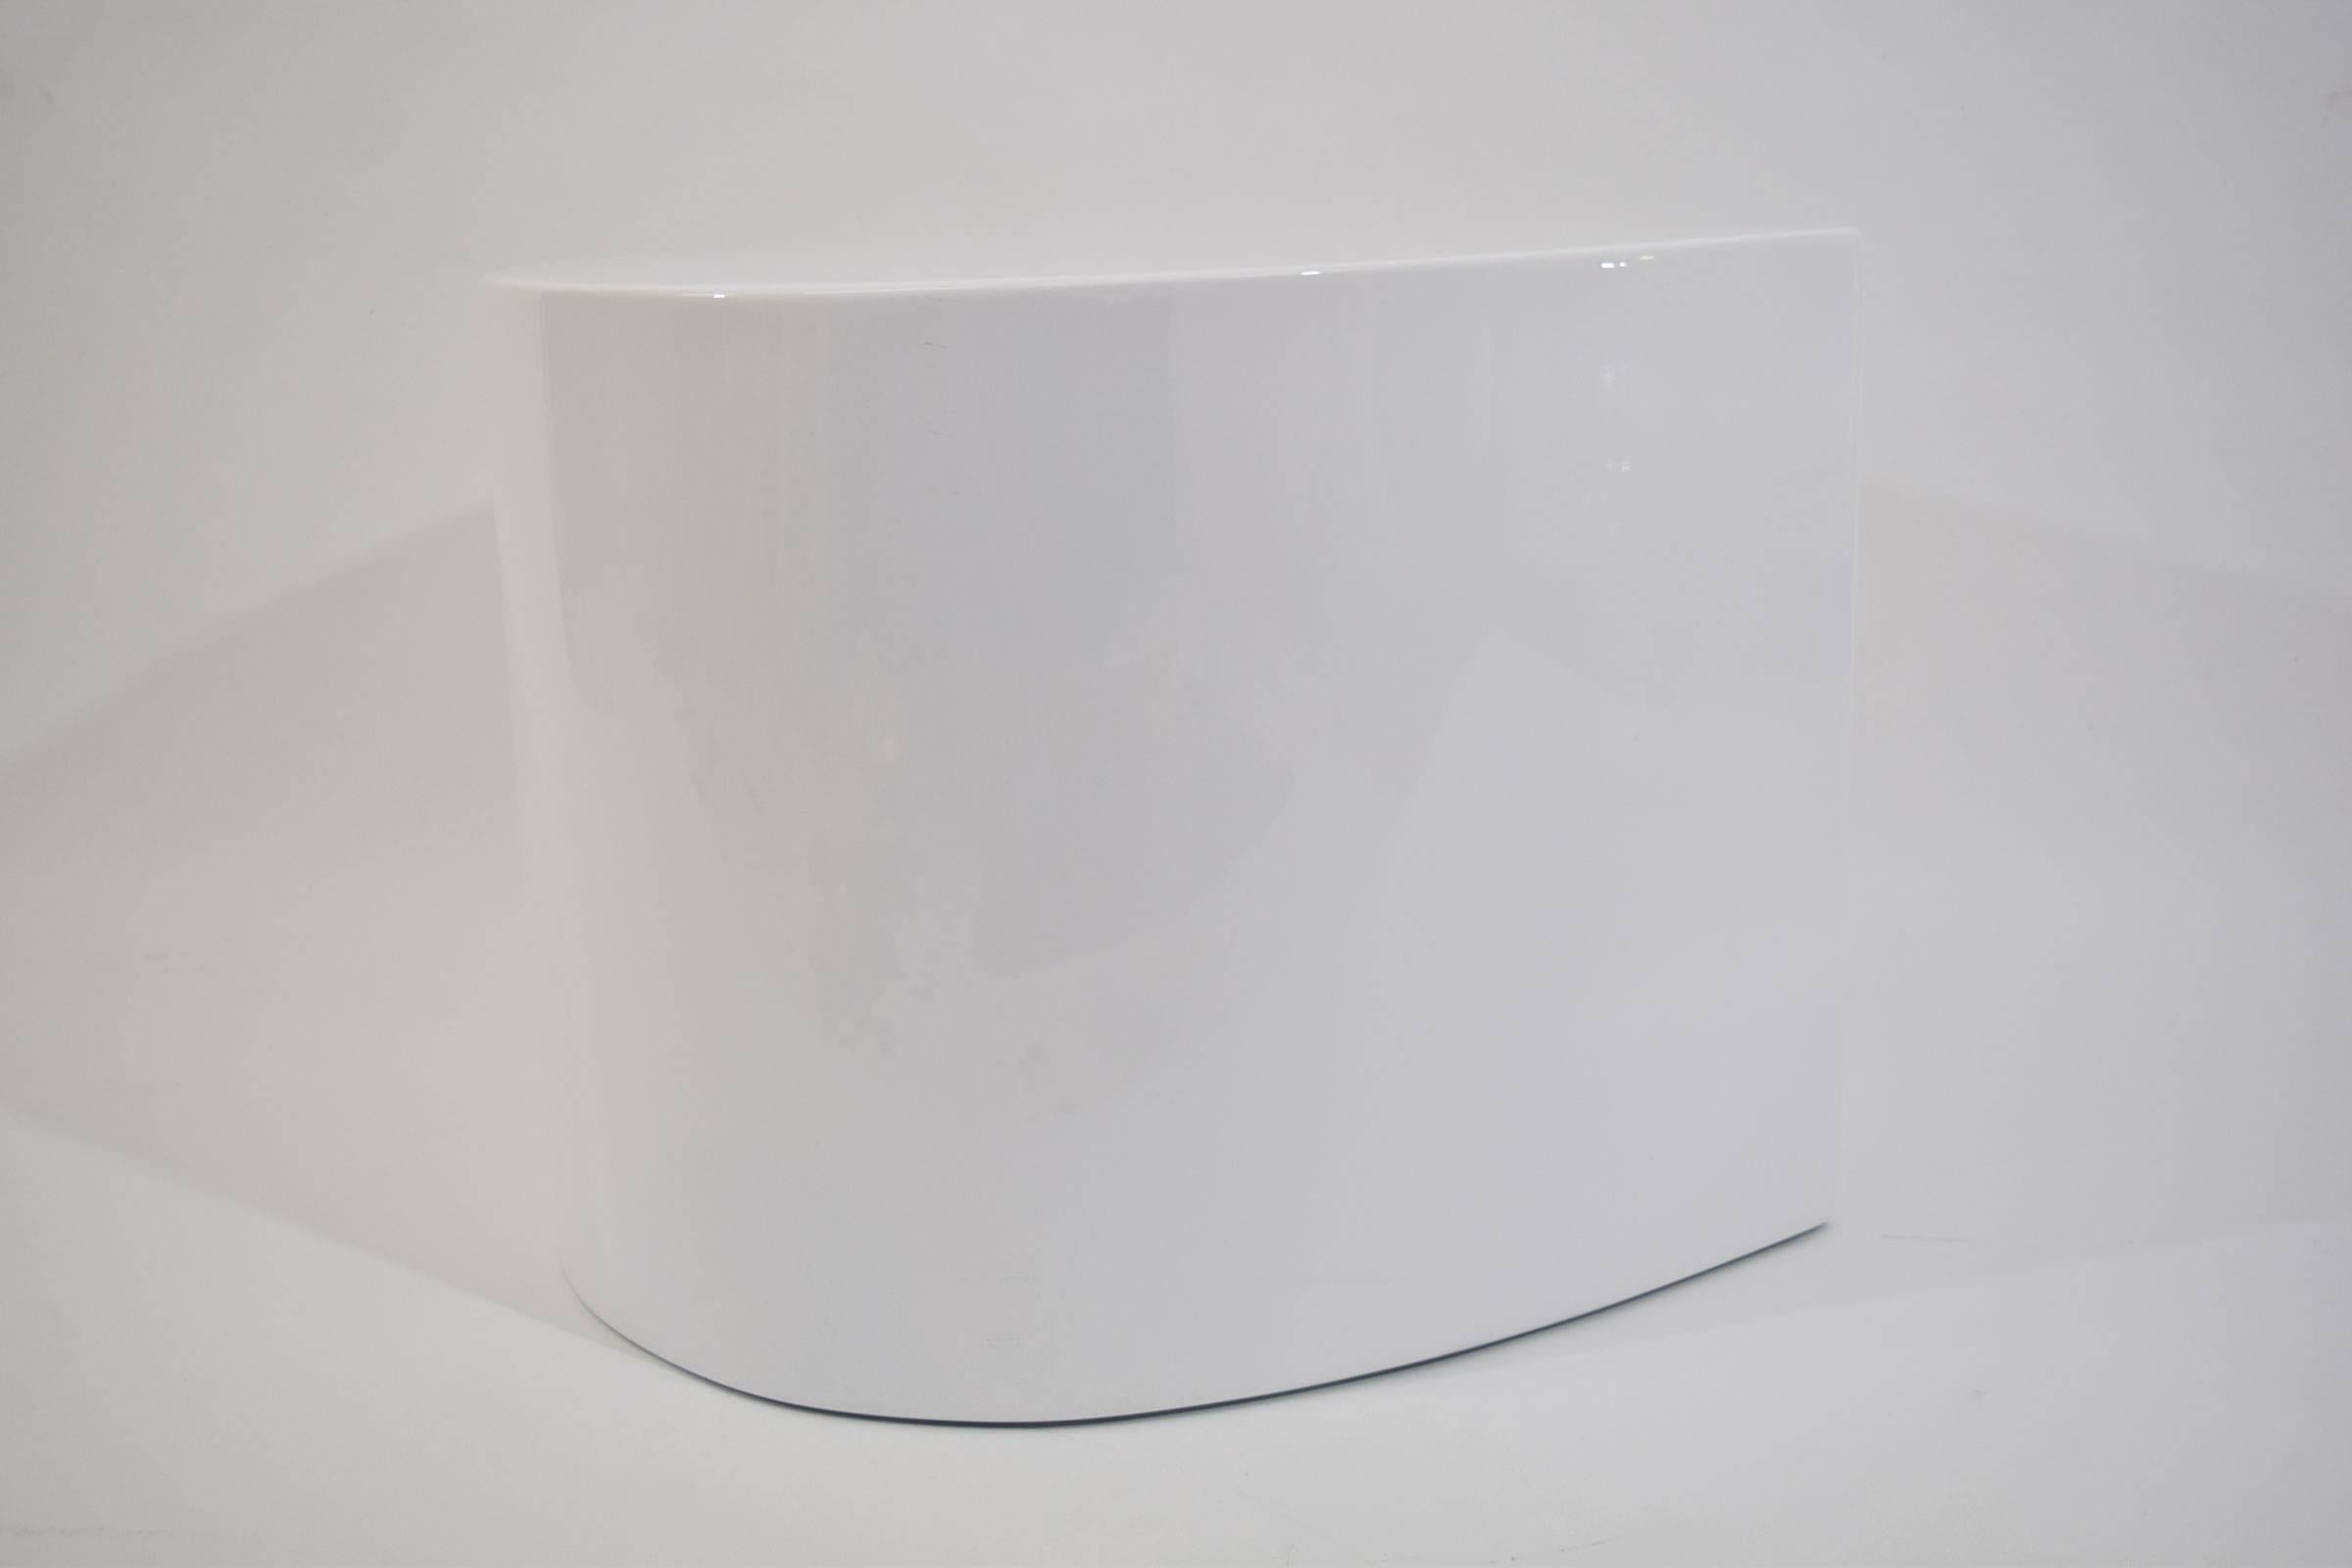 Excellent quality teardrop shaped side table in white lacquer.